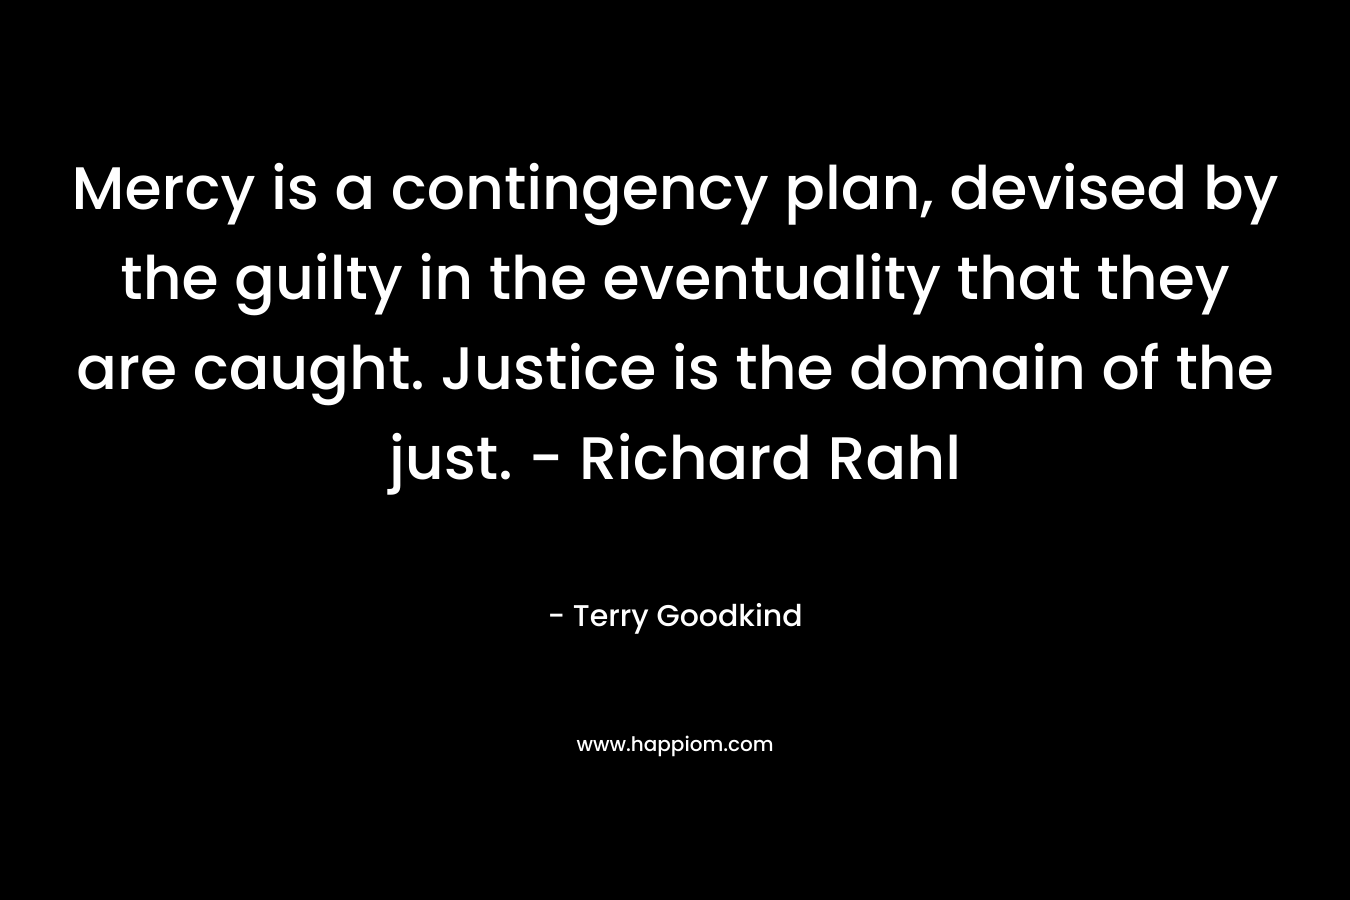 Mercy is a contingency plan, devised by the guilty in the eventuality that they are caught. Justice is the domain of the just. – Richard Rahl – Terry Goodkind